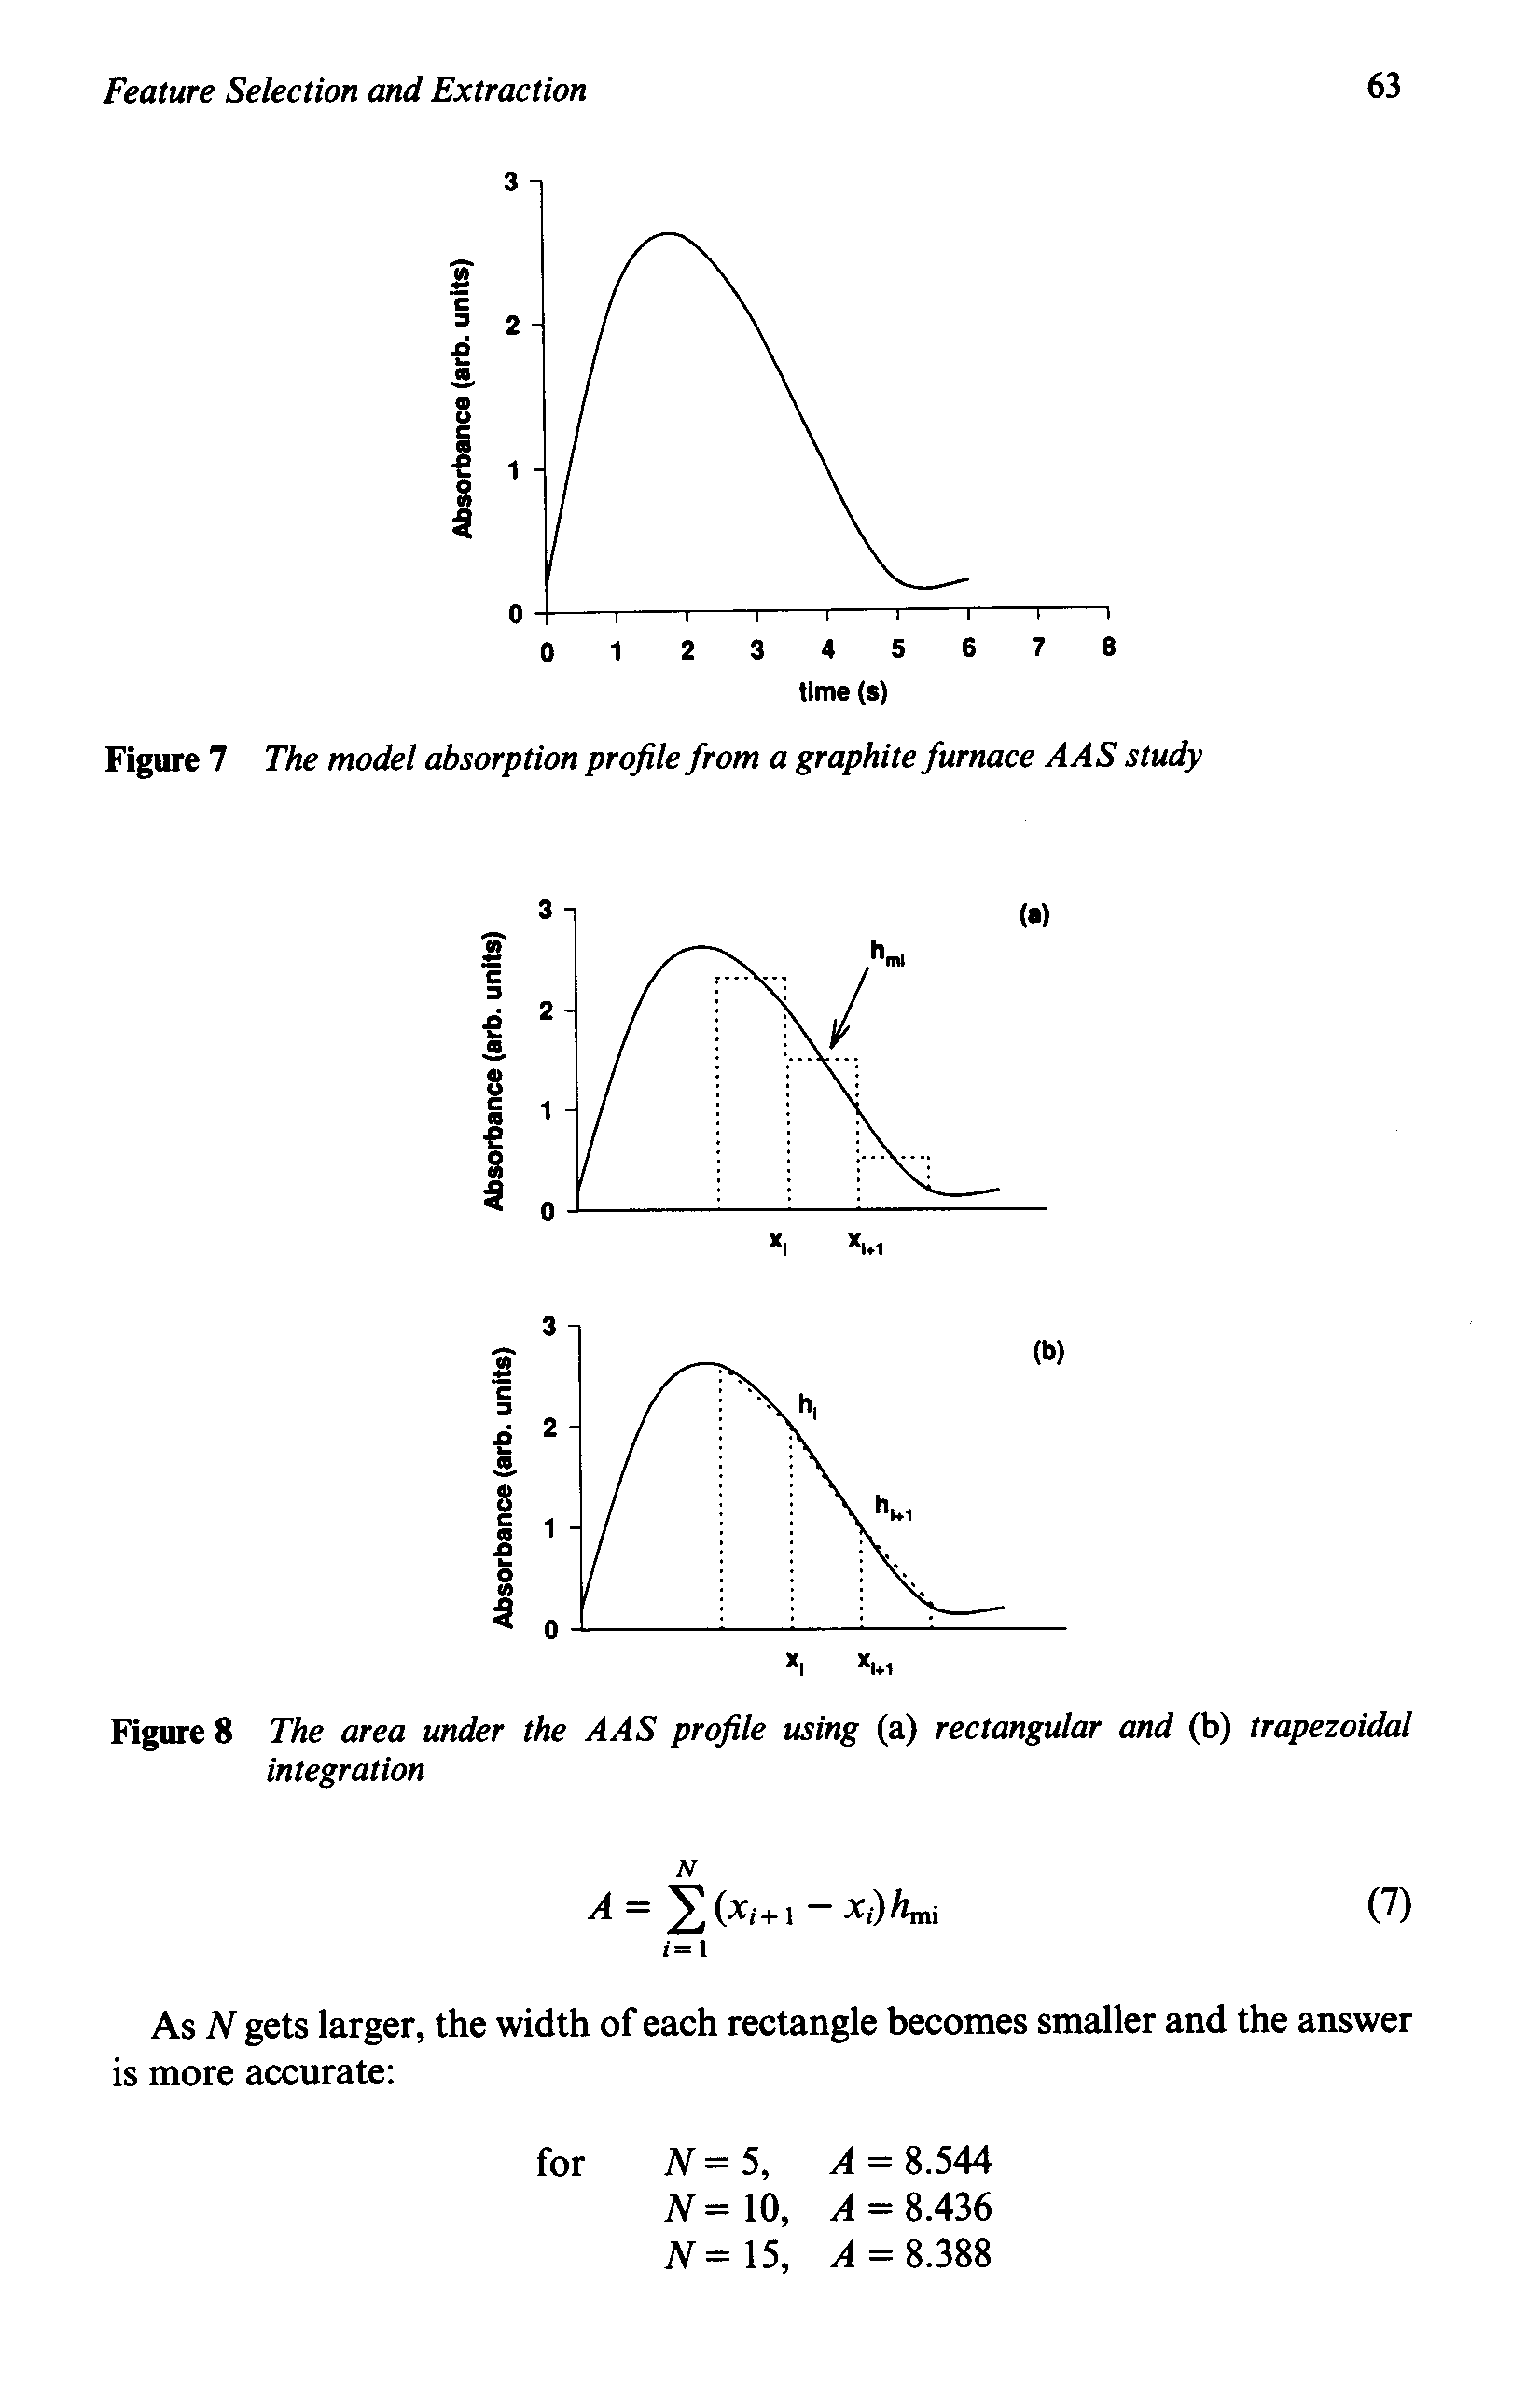 Figure 7 The model absorption profile from a graphite furnace AAS study...